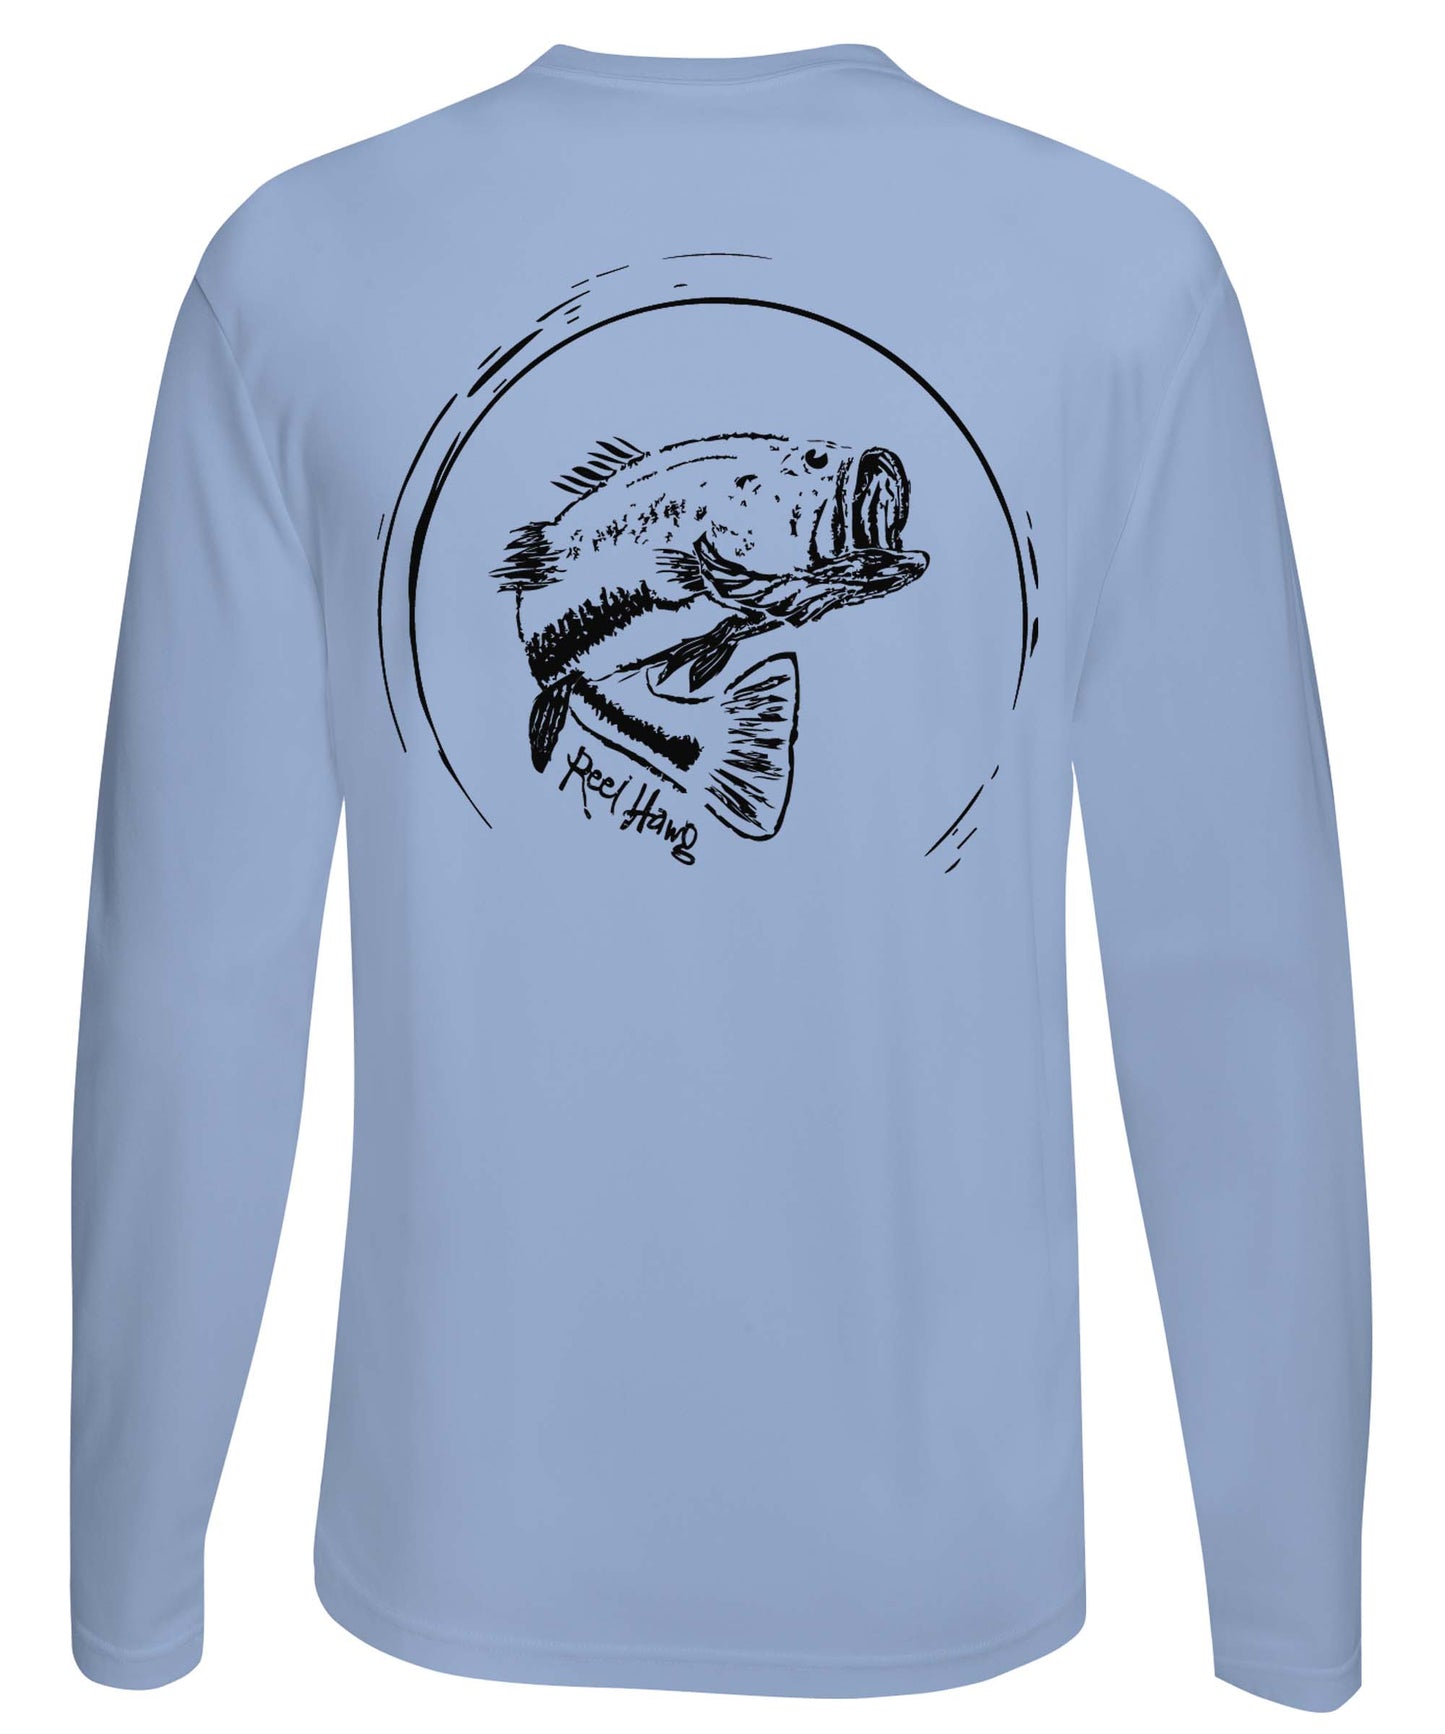 Bass fishing "Reel Hawg" light blue performance long sleeve shirt with 50+ UV sun protection by Reel Fishy